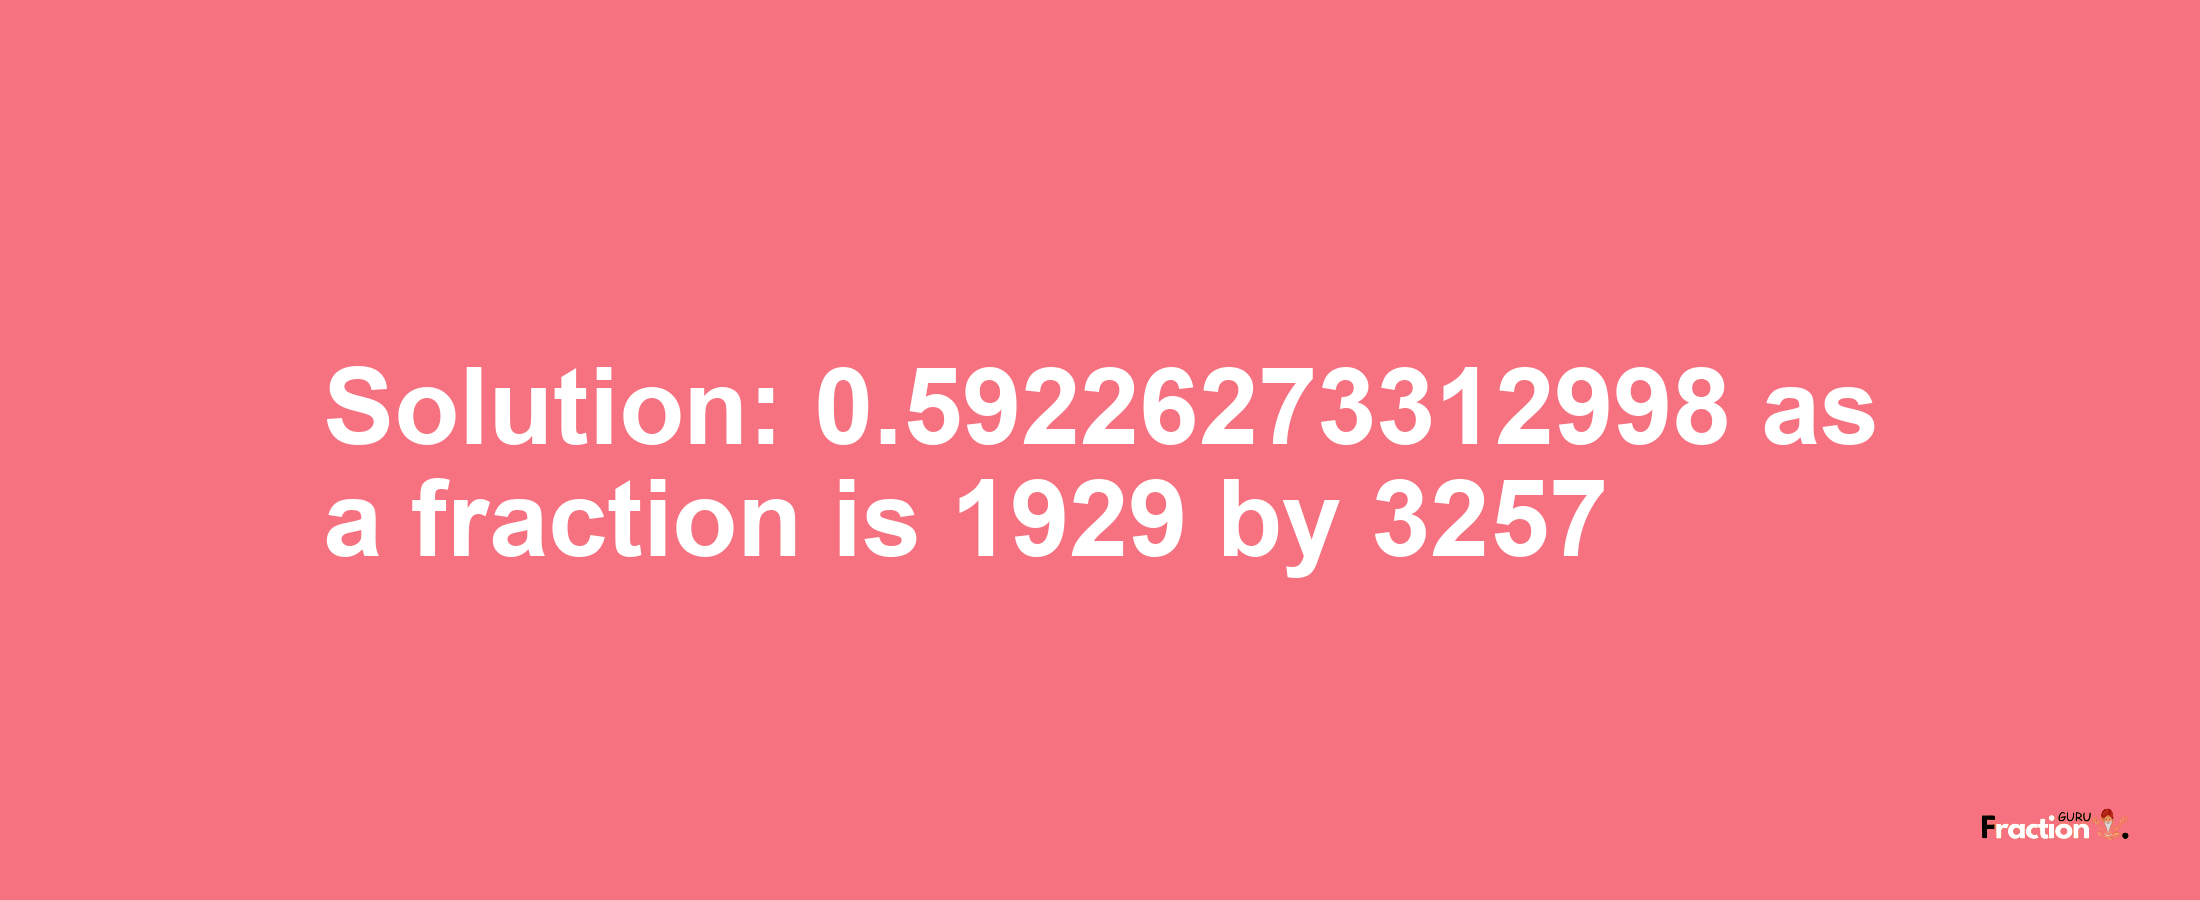 Solution:0.59226273312998 as a fraction is 1929/3257